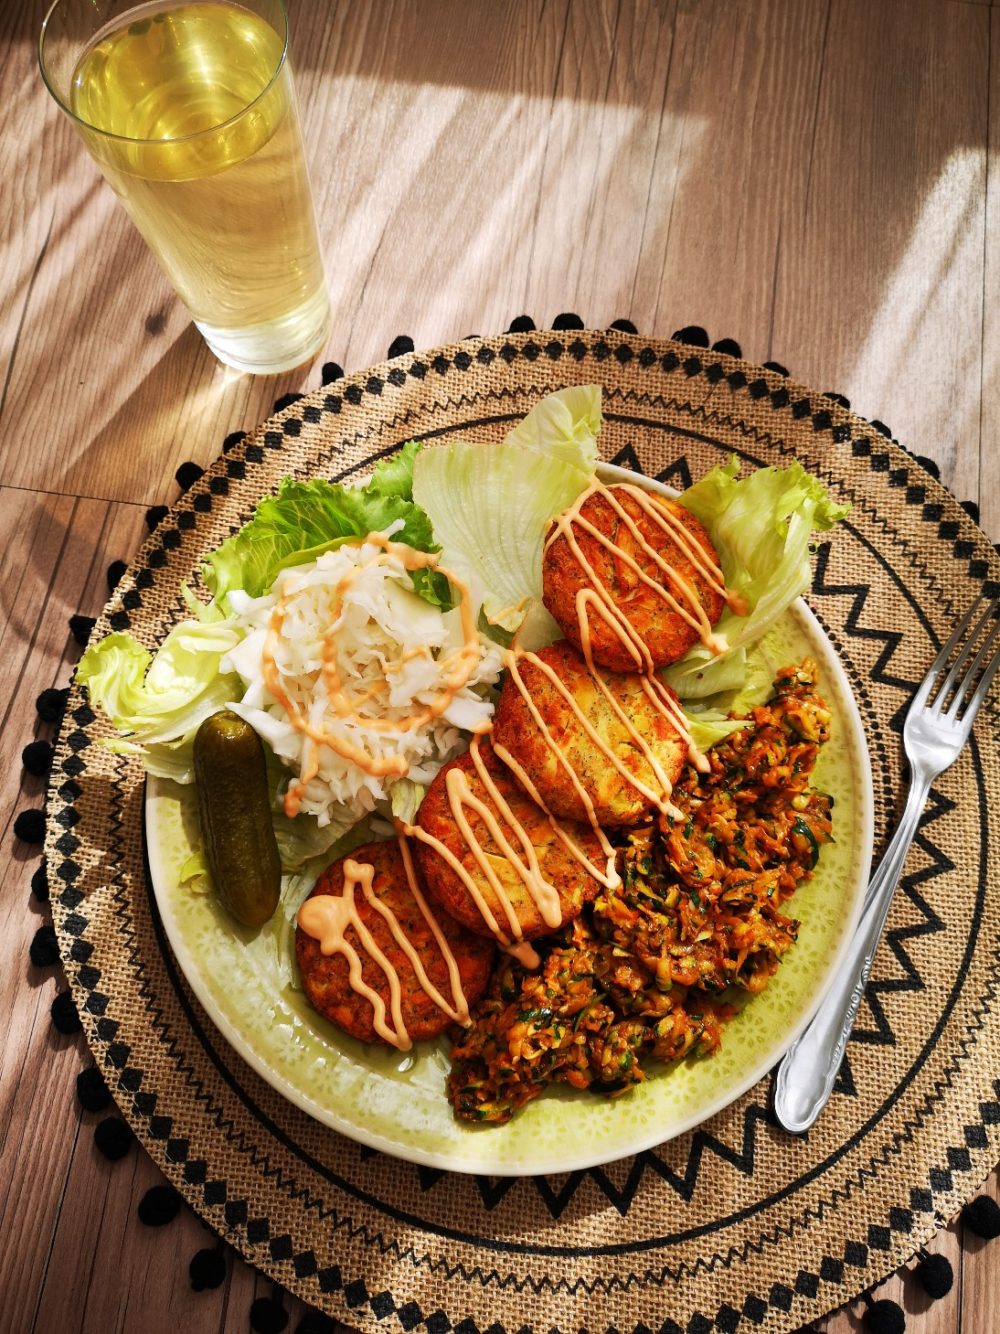 aruk patties on a light green plate on a decorative placemat with a fork, next to a glass